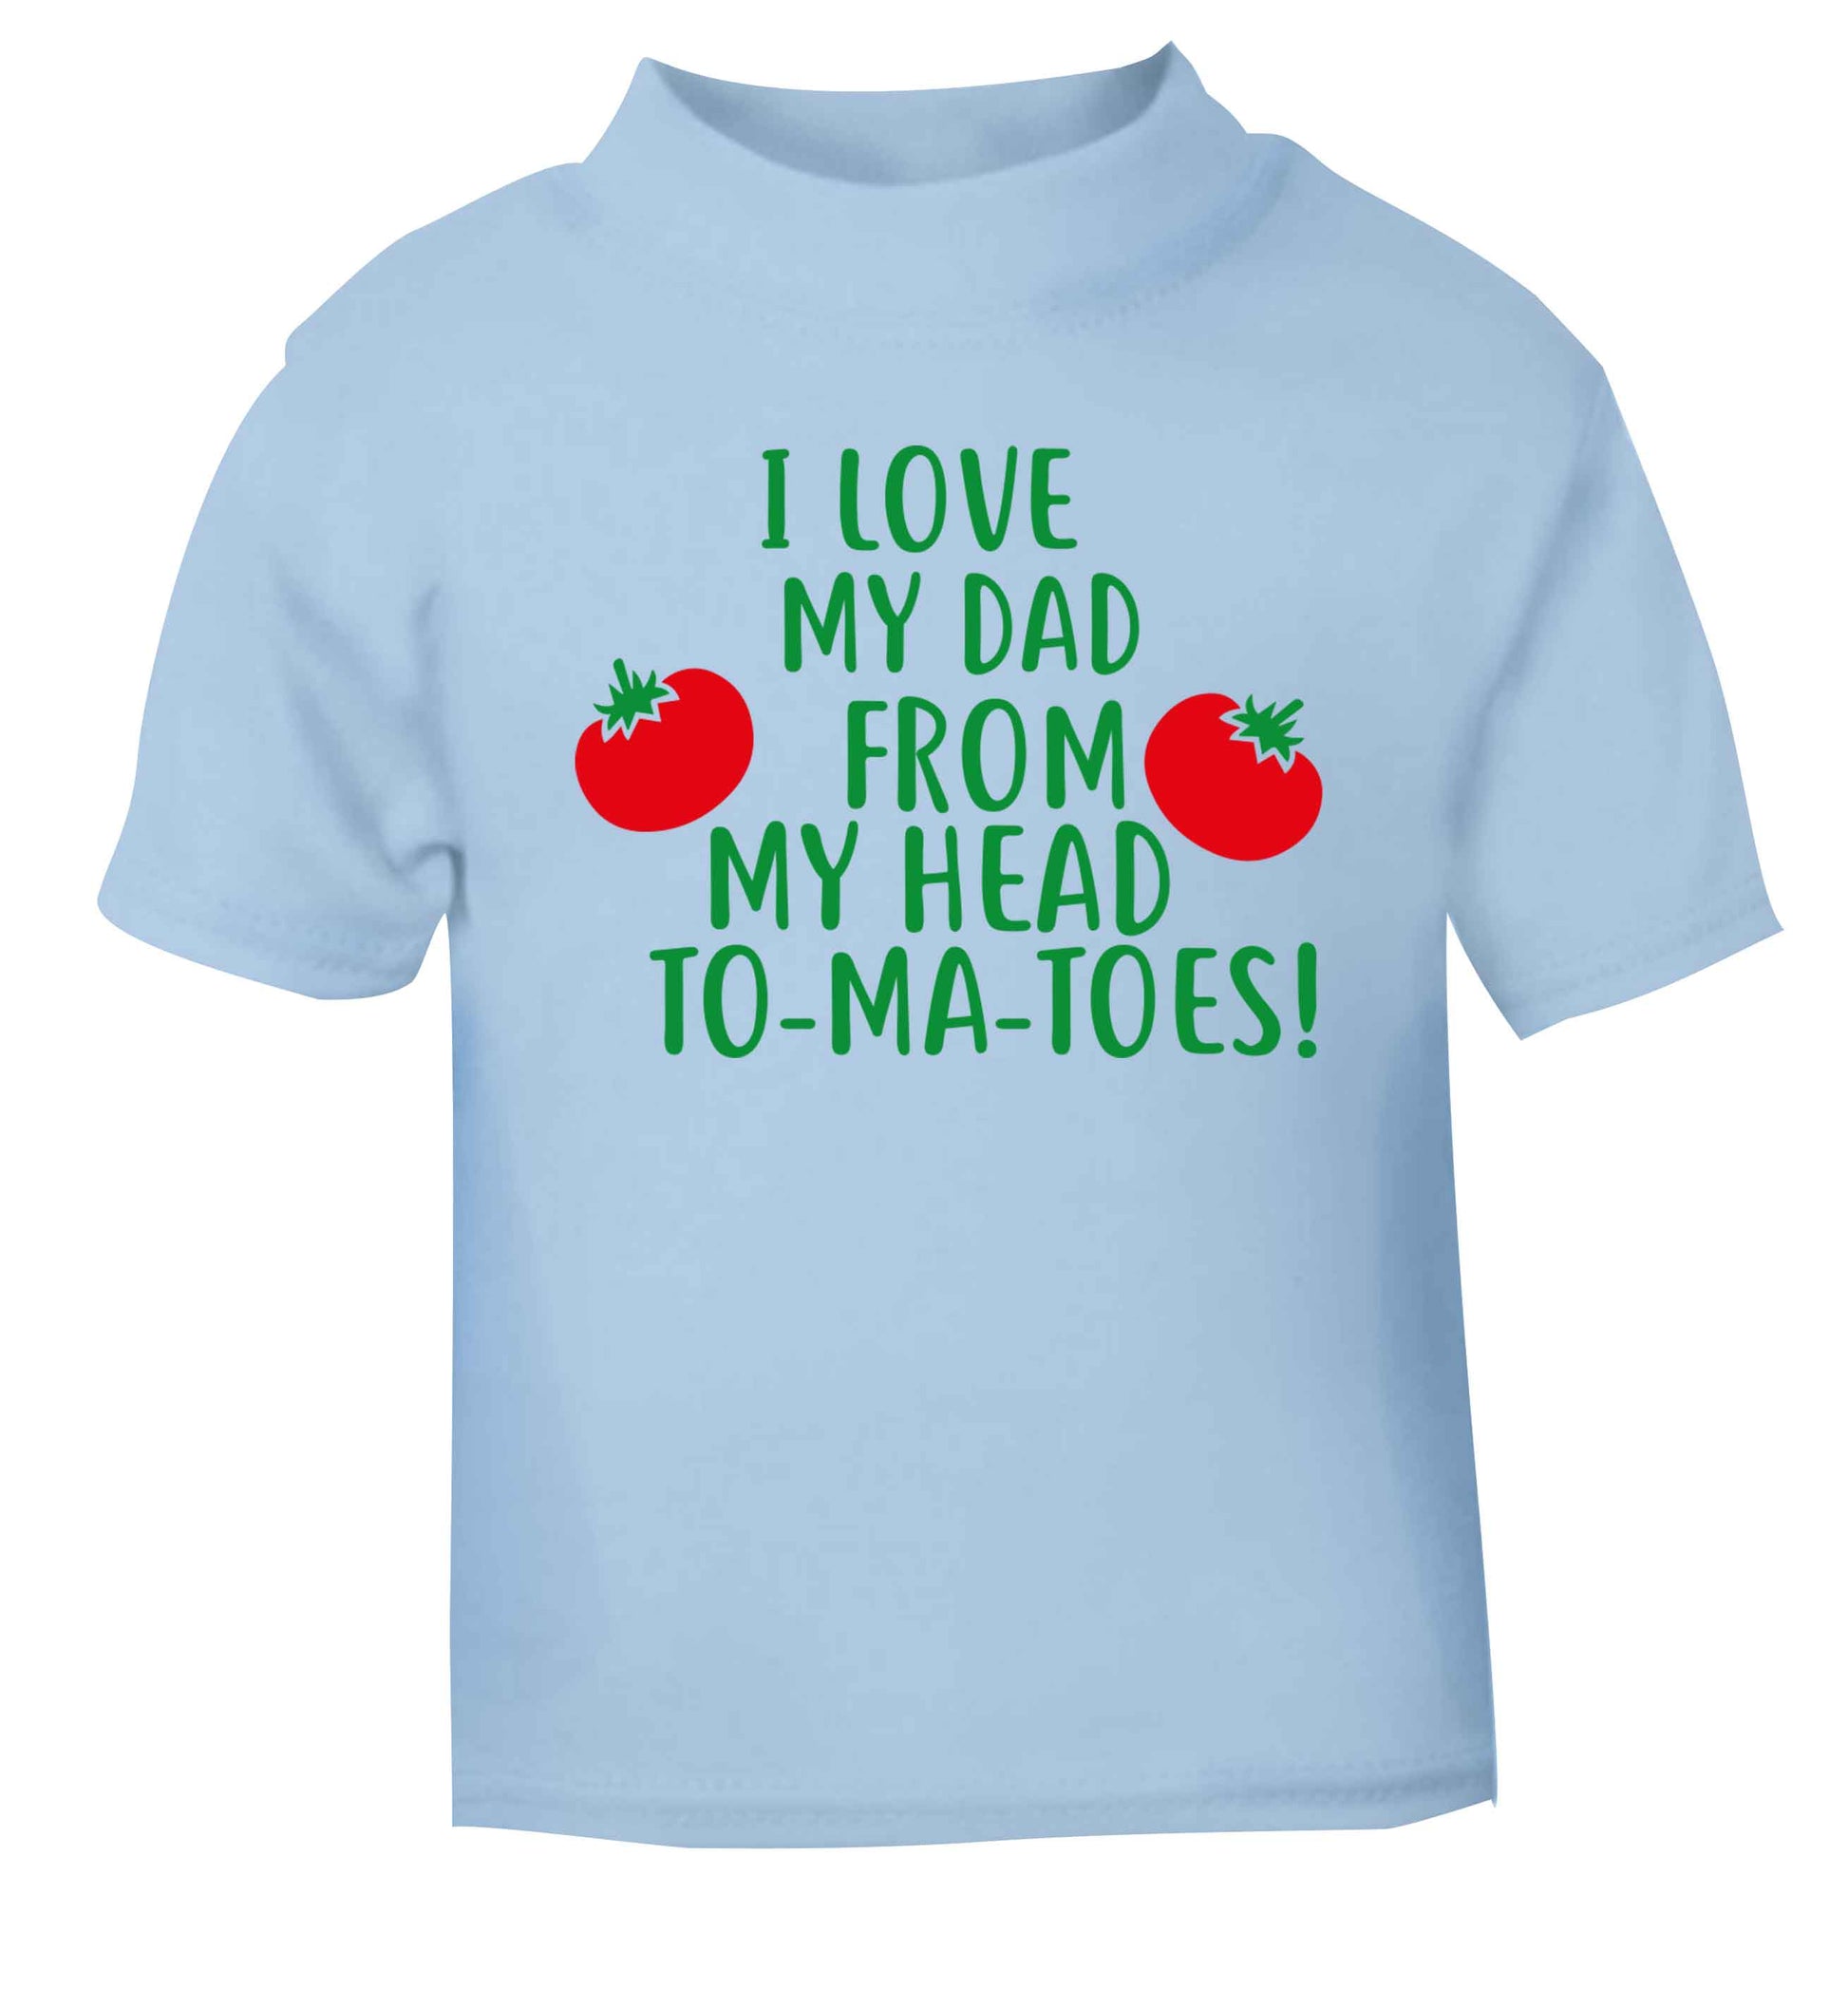 I love my dad from my head to-ma-toes light blue baby toddler Tshirt 2 Years